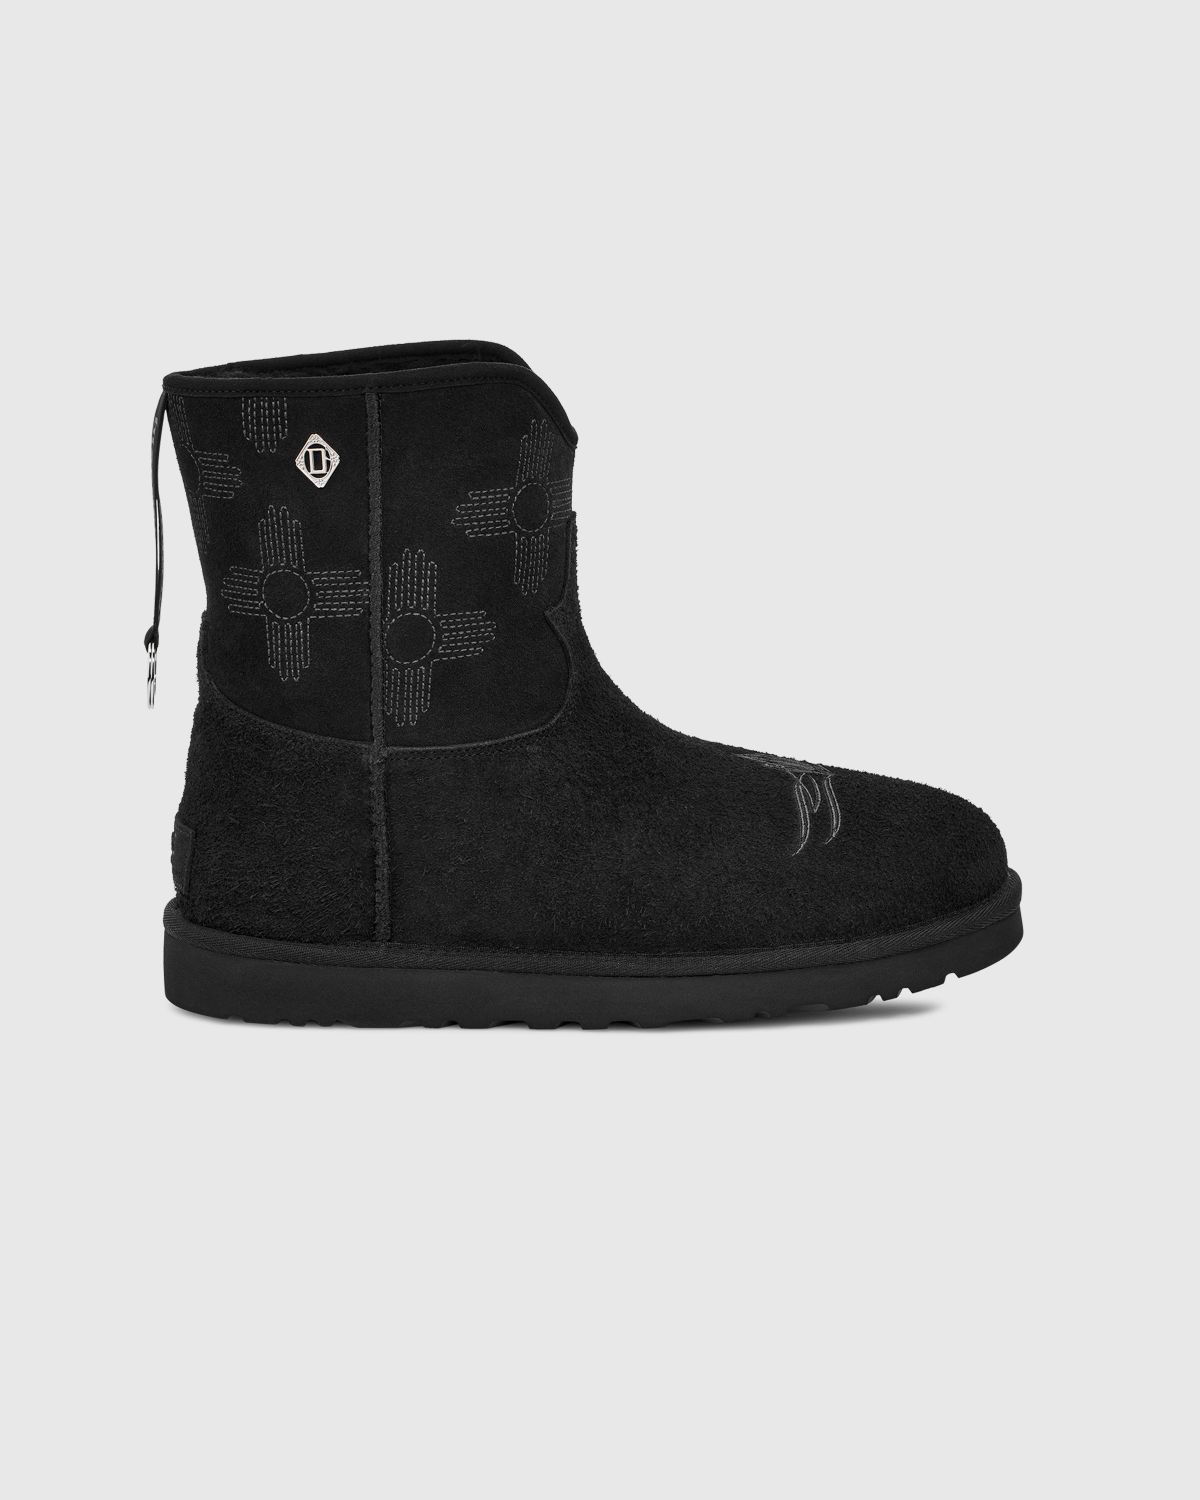 Ugg x Children of the Discordance – Classic Short Boot Black - Lined Boots - Black - Image 1